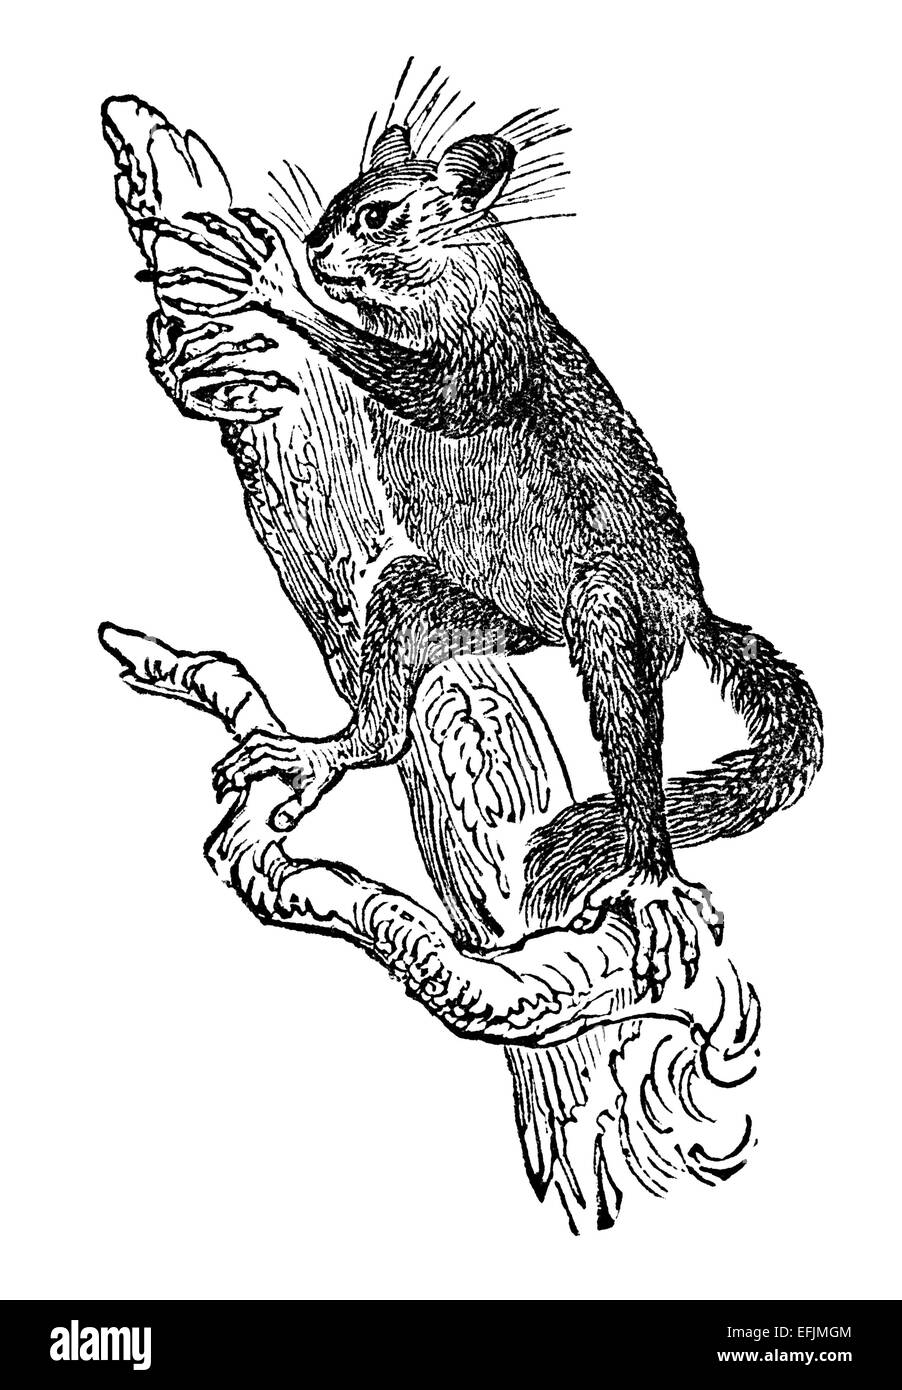 Victorian engraving of an aye-aye lemur. Digitally restored image from a mid-19th century Encyclopaedia. Stock Photo